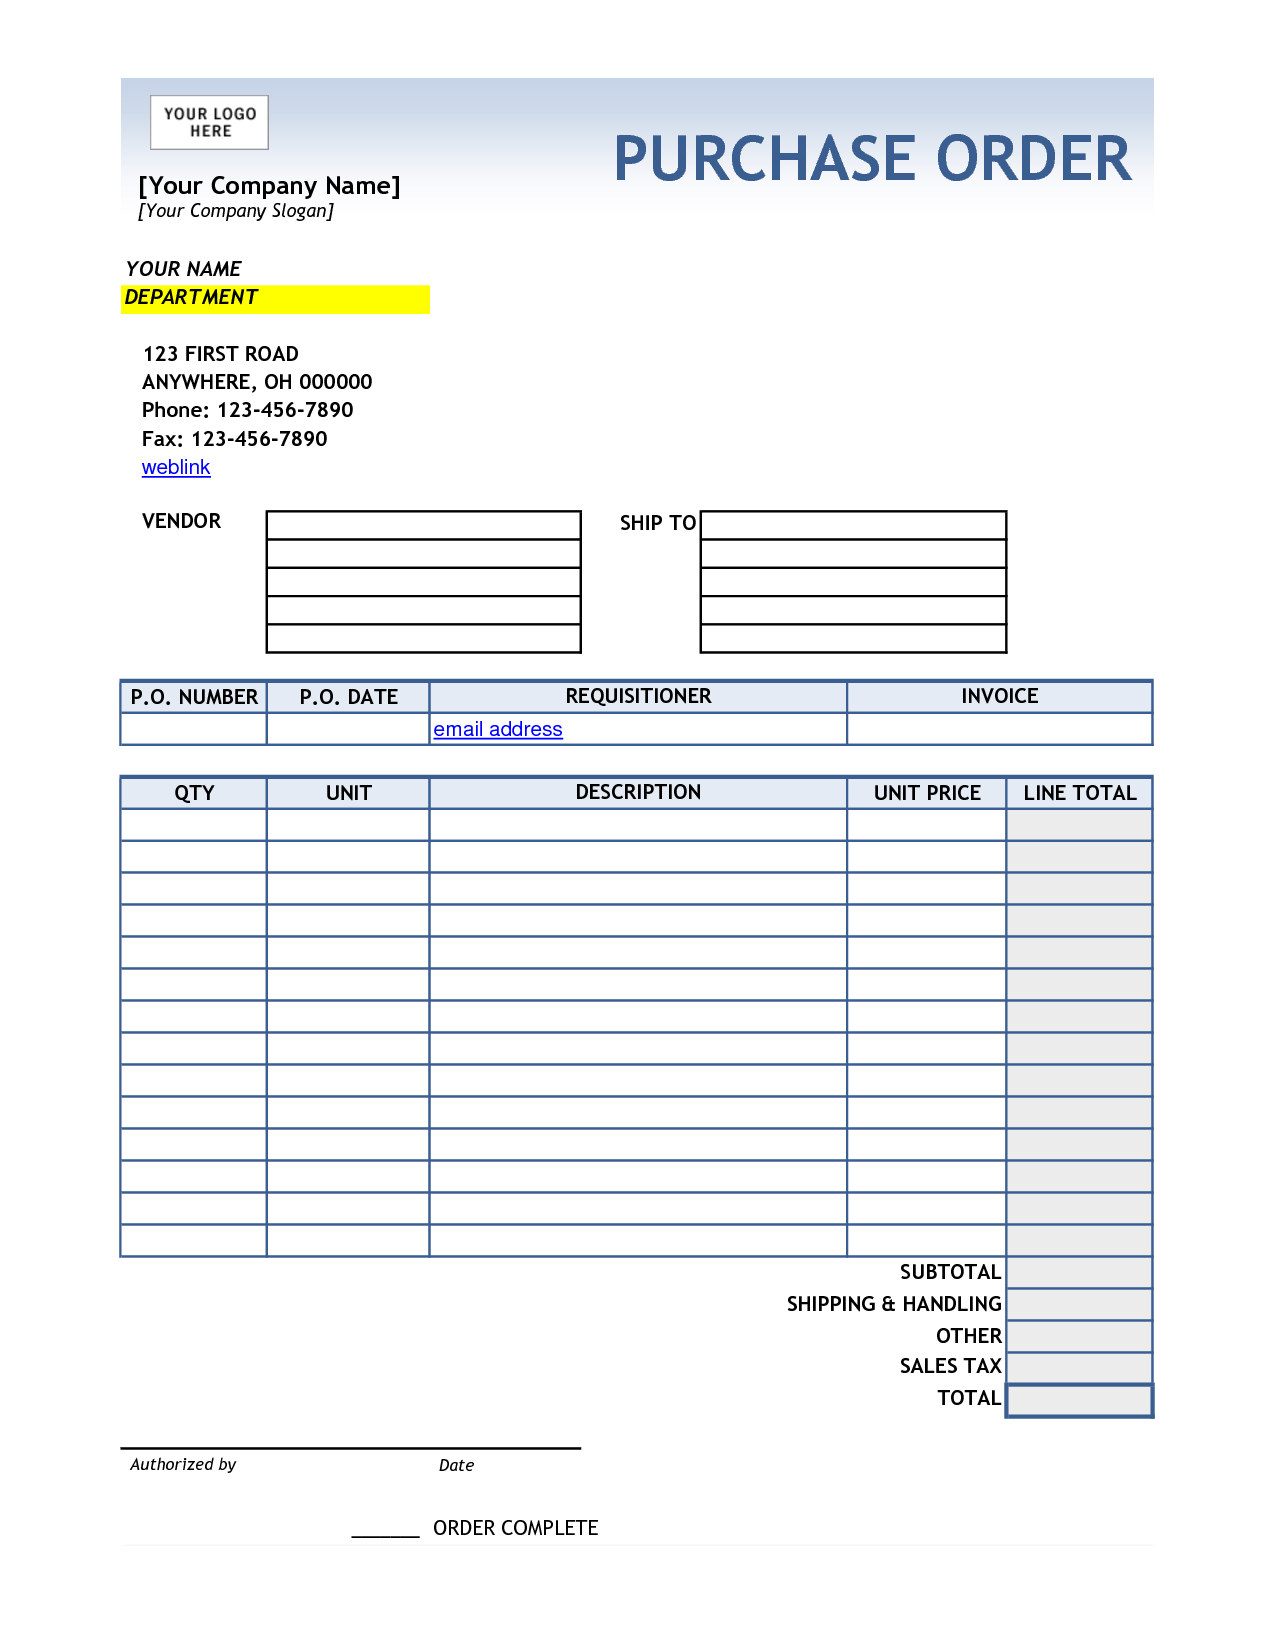 Free Printable Purchase Order Form For Home Decorations Printable 